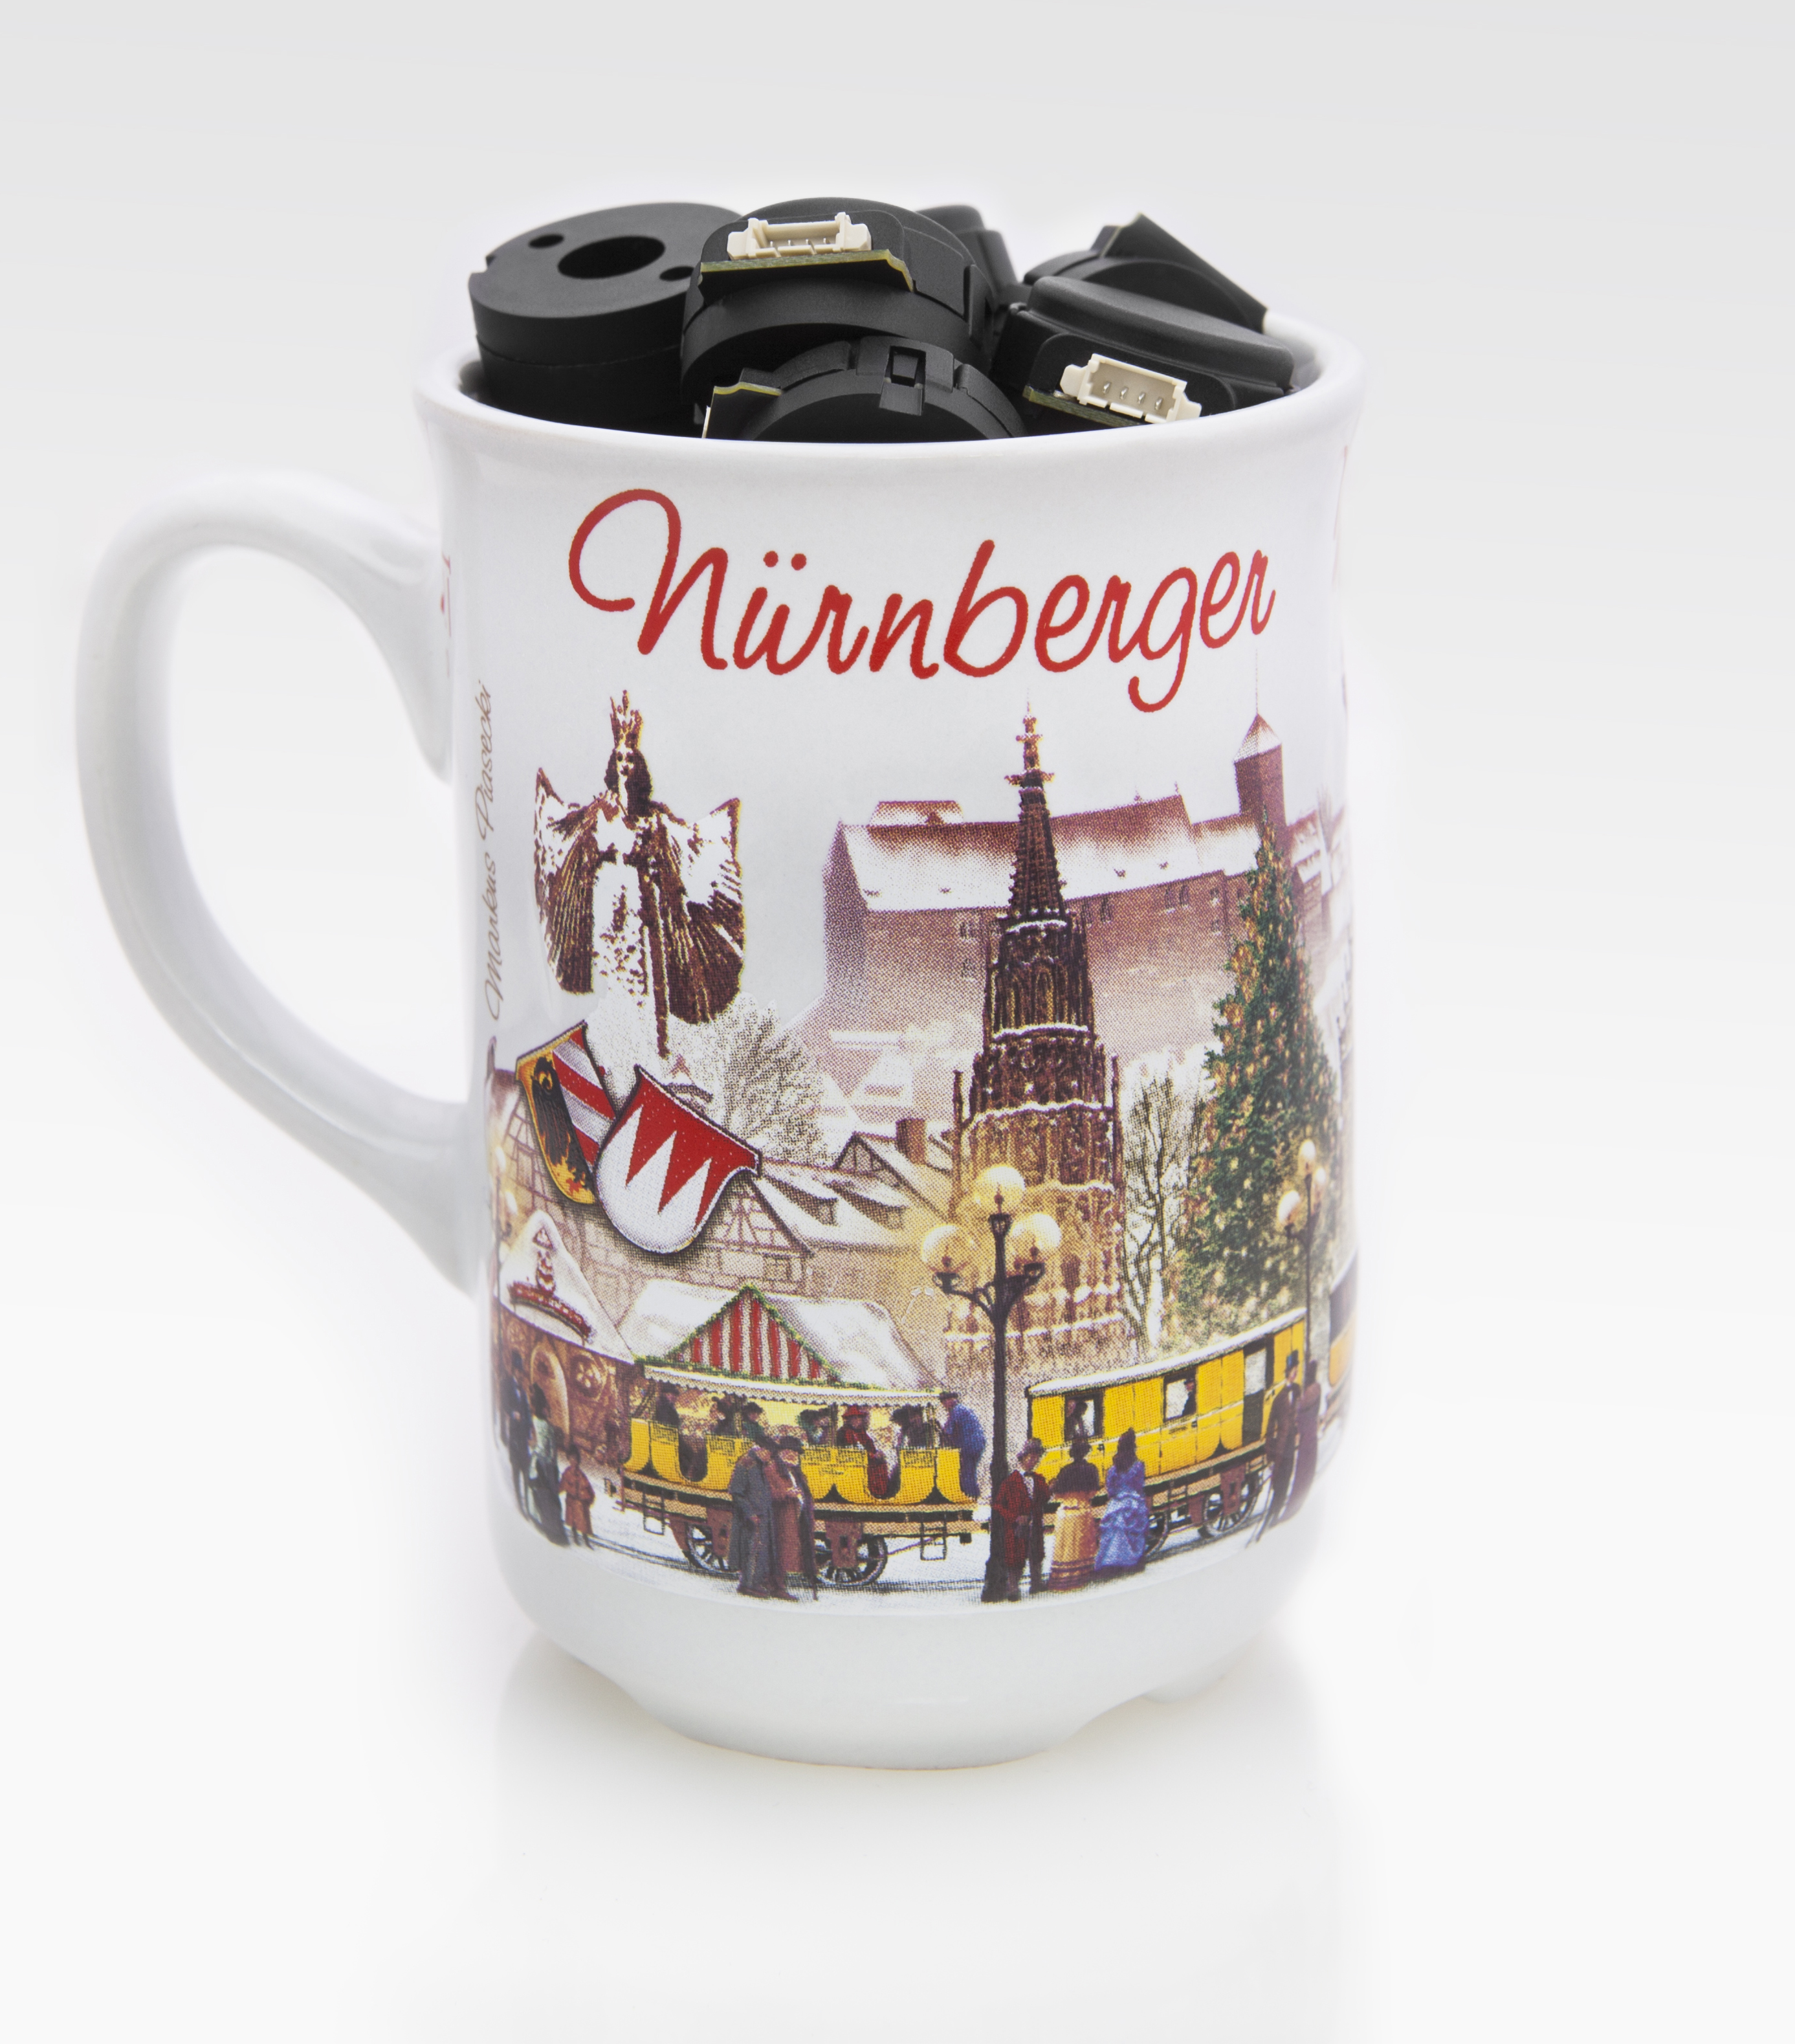 Small-Enough-to-Fit-34-in-a-Christkindlesmarkt-Glühwein-Commemorative-Mug (1)